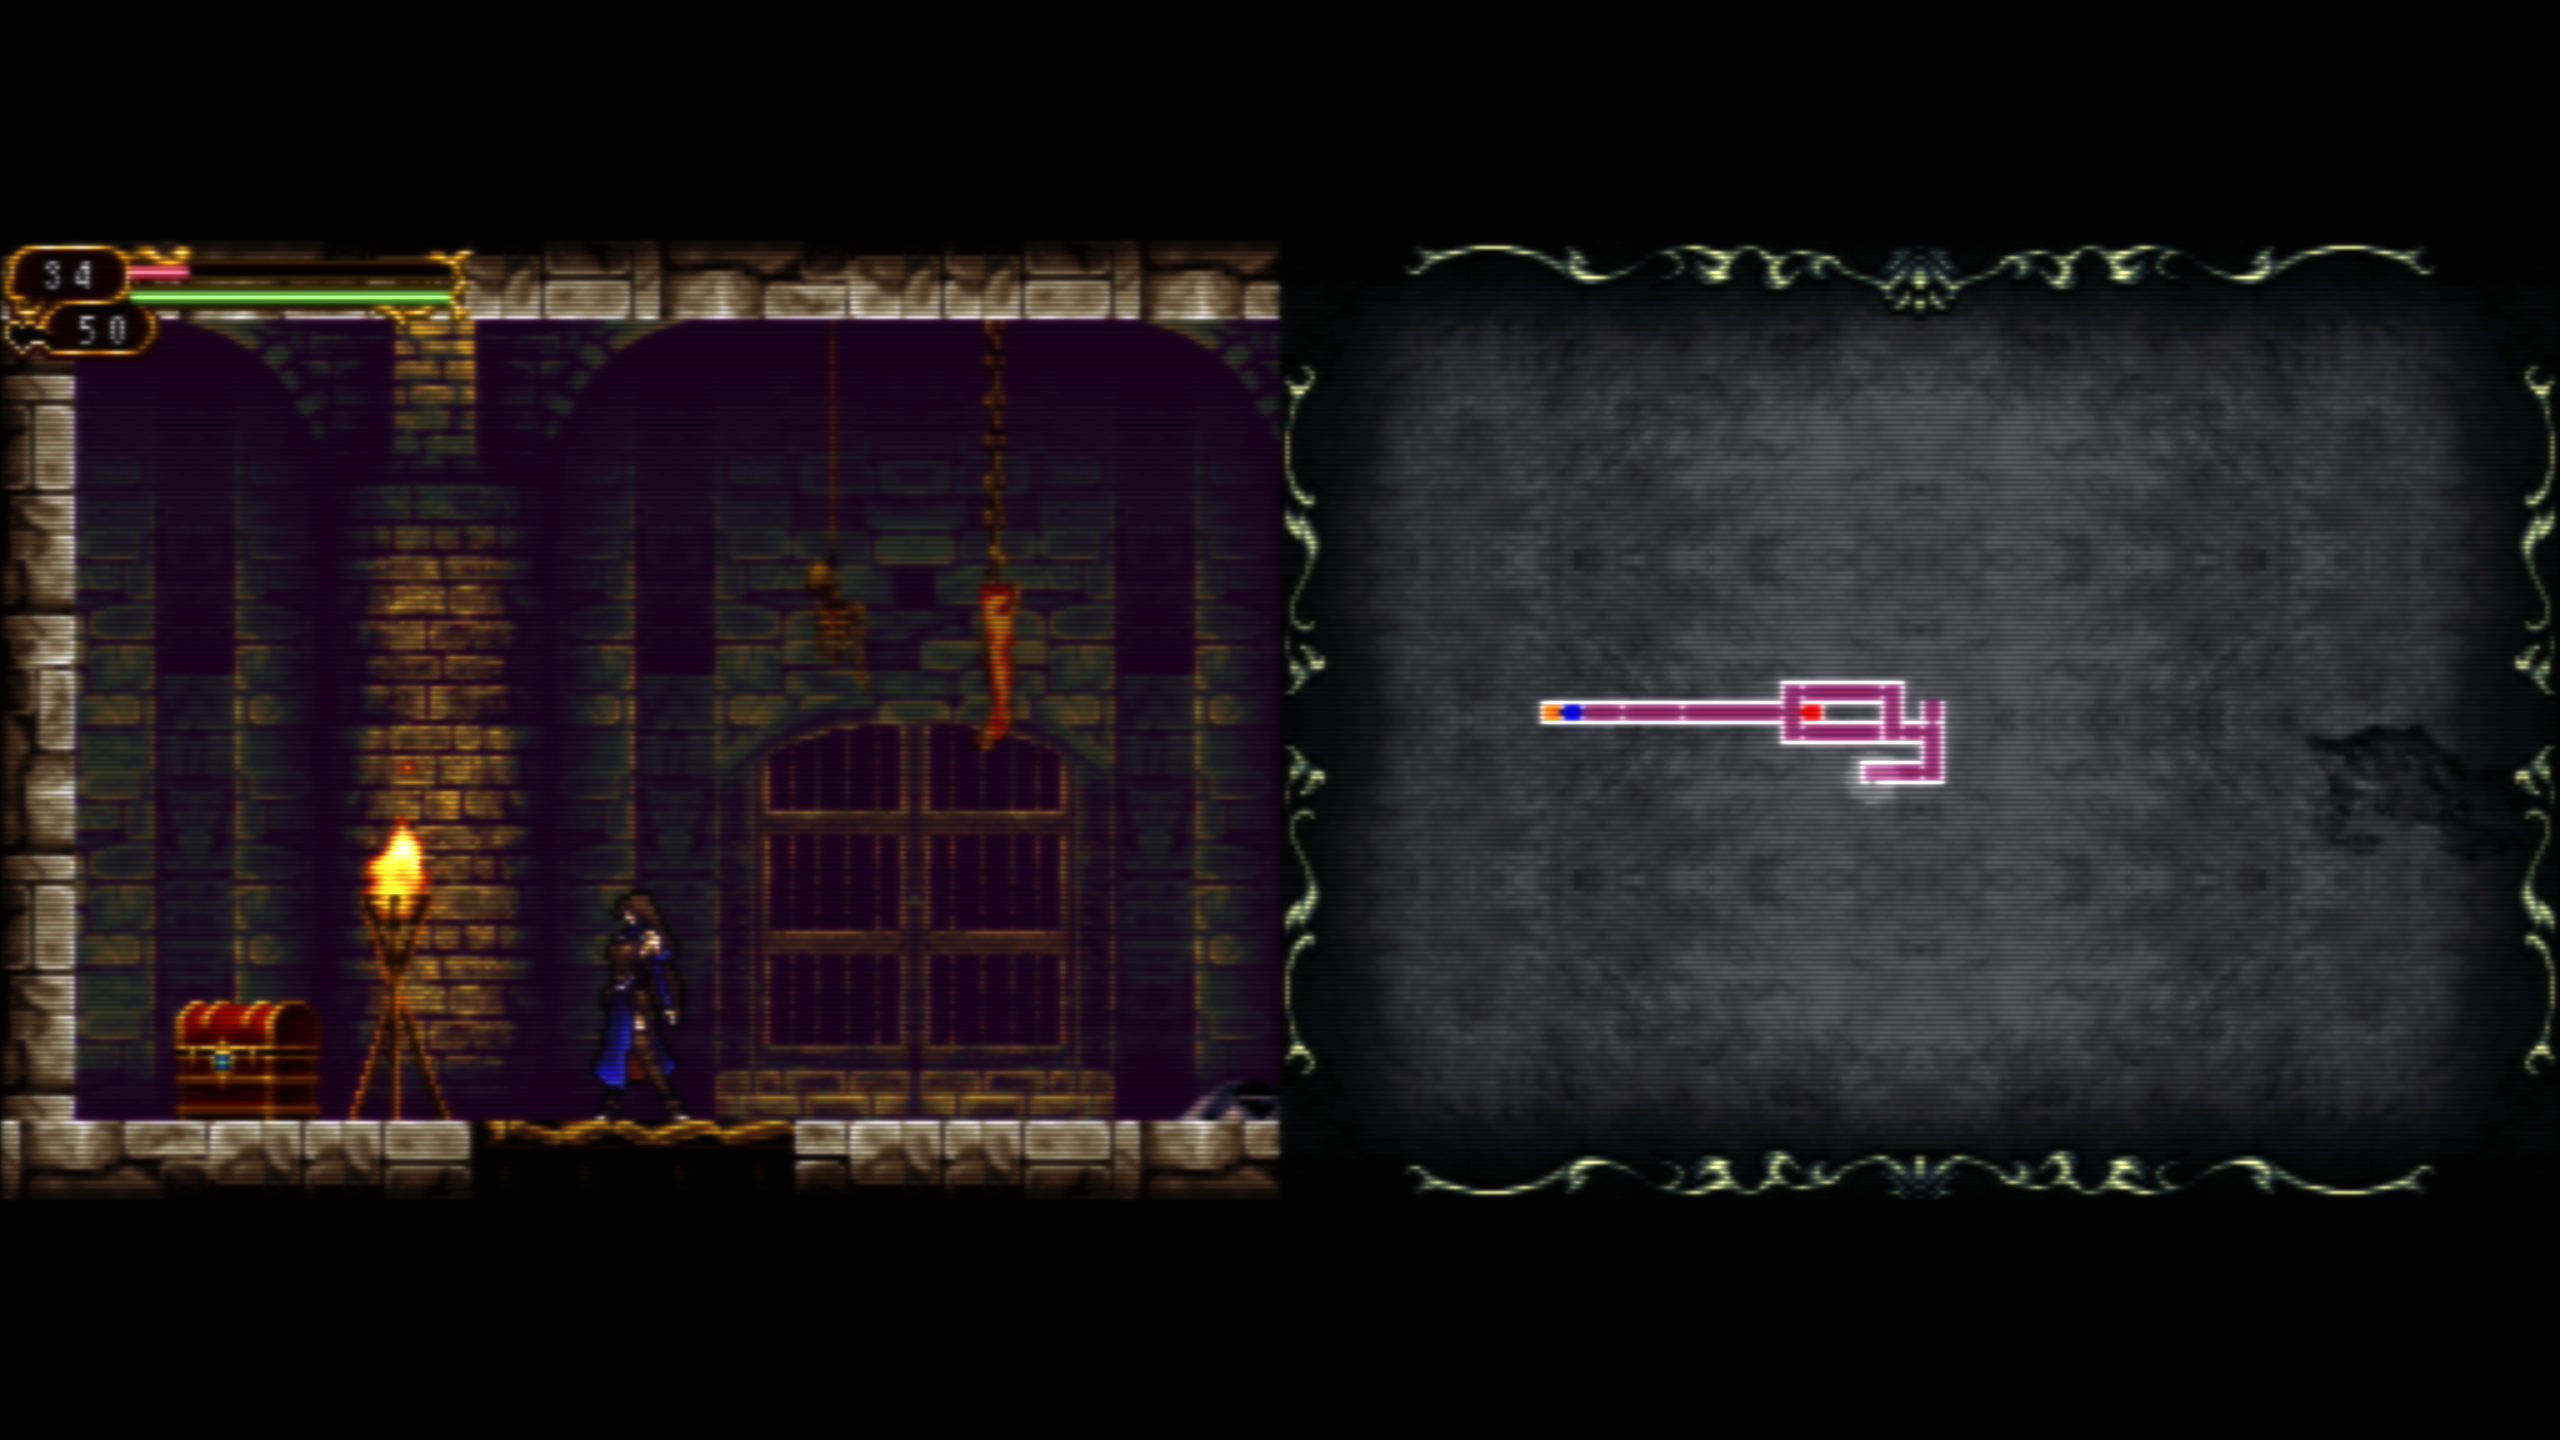 crt æsthetic for castlevania: ooe - after